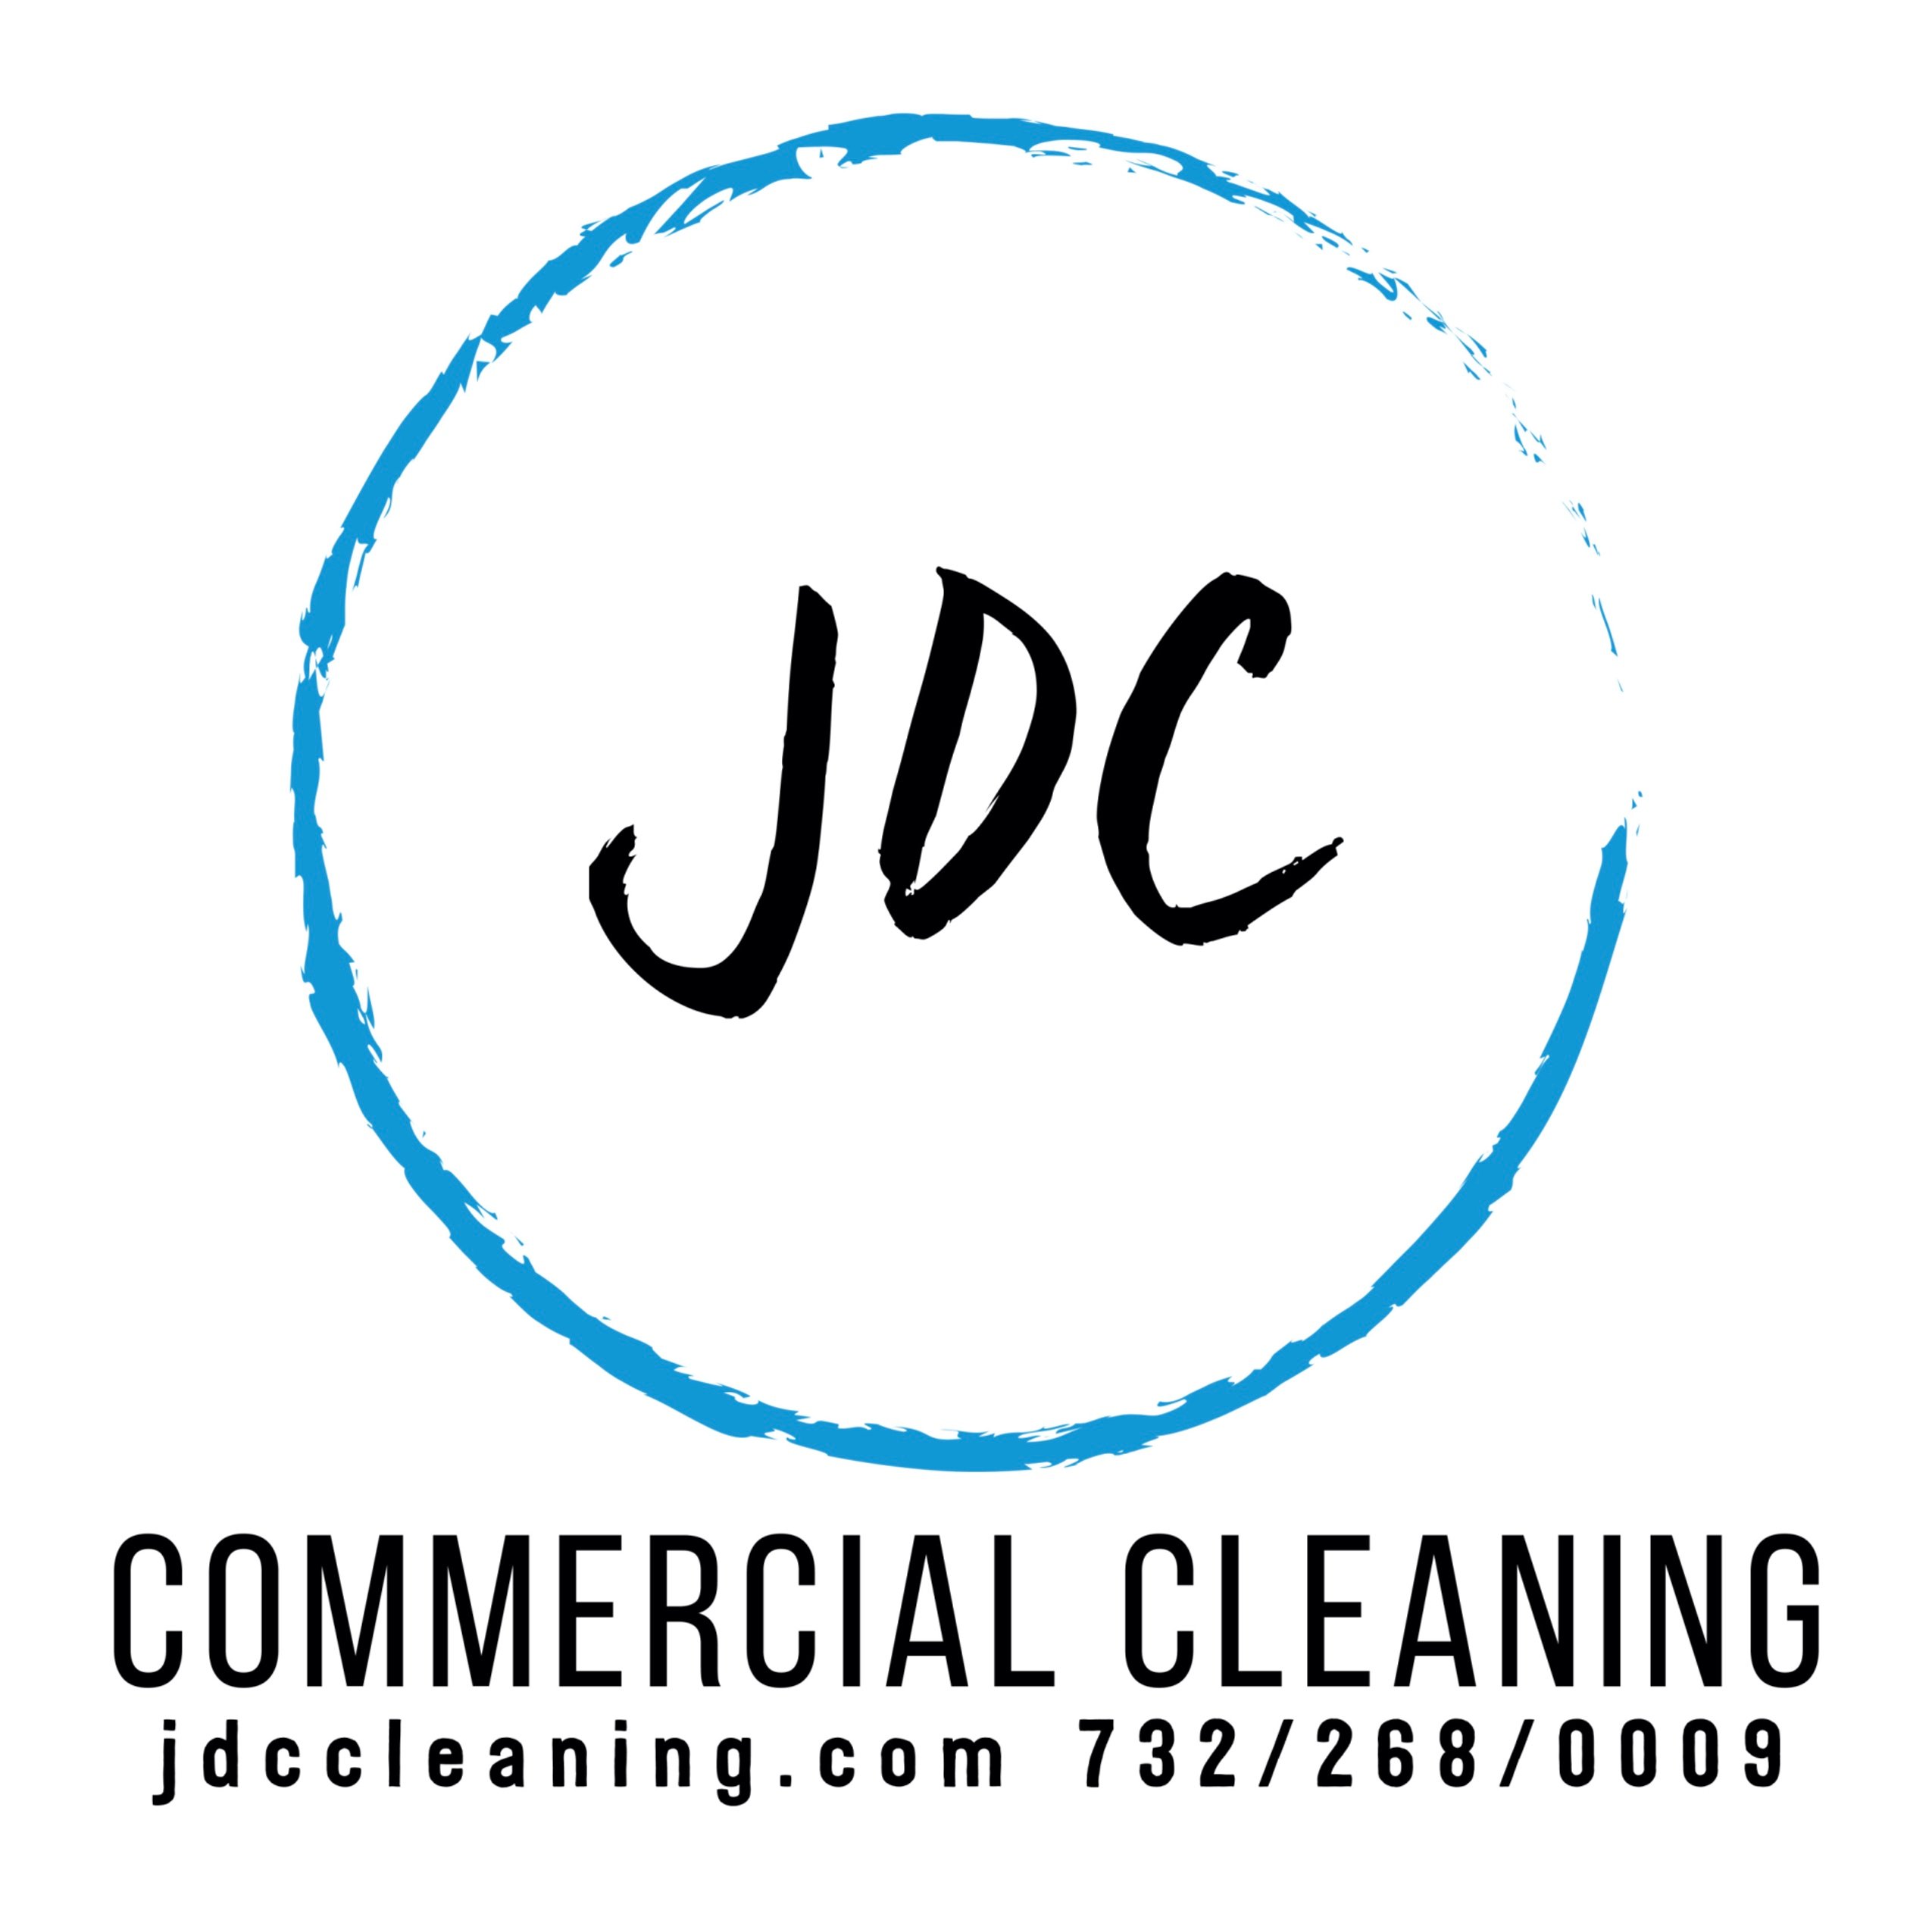 JDC Commercial Cleaning Logo